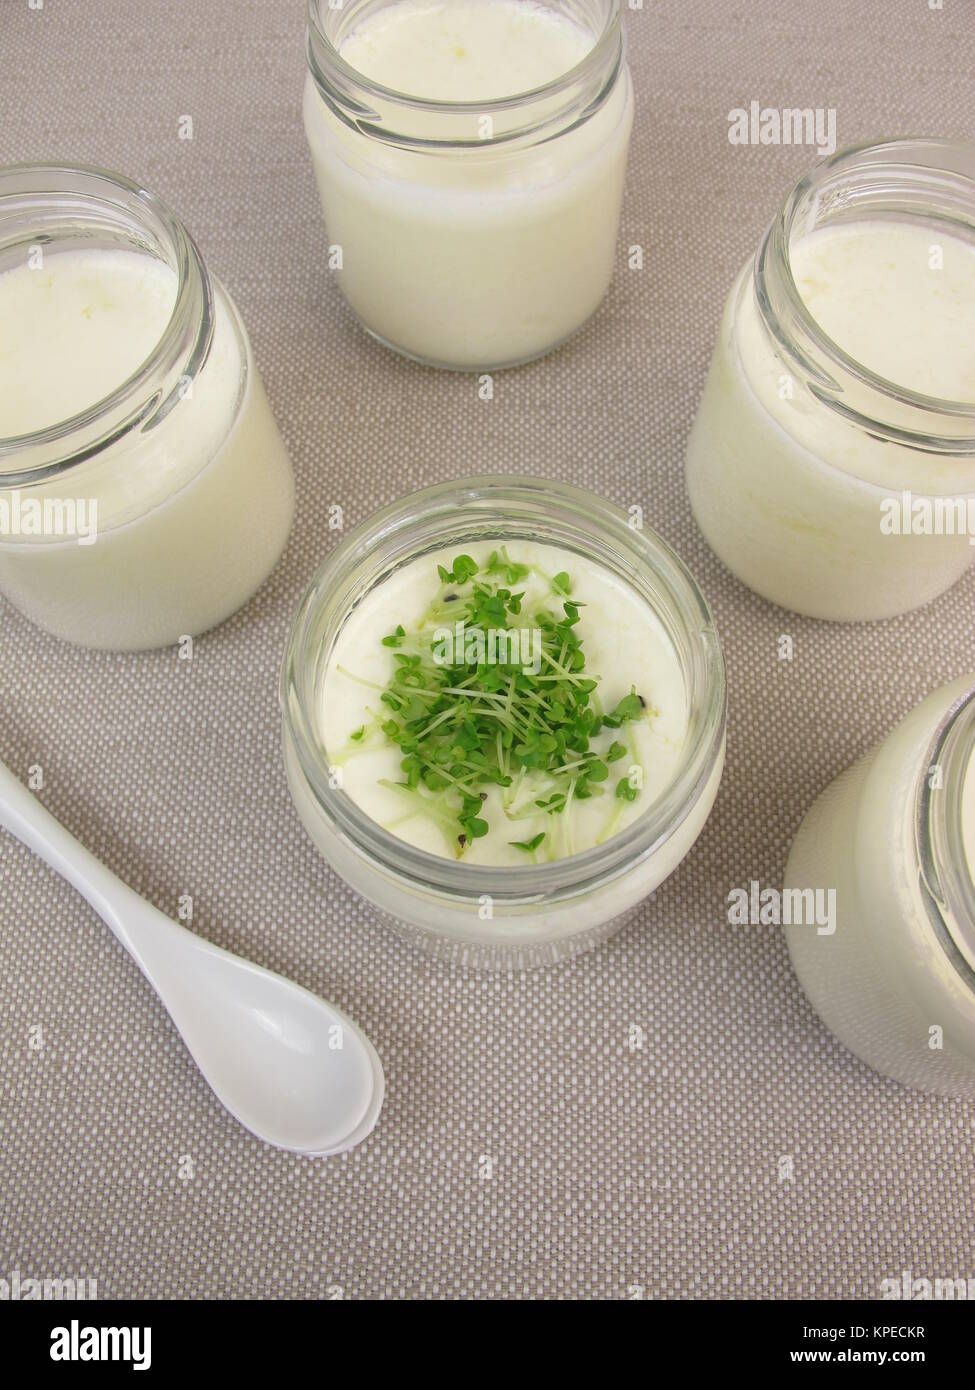 yogurt from the yoghurt maker with basil sprouts Stock Photo